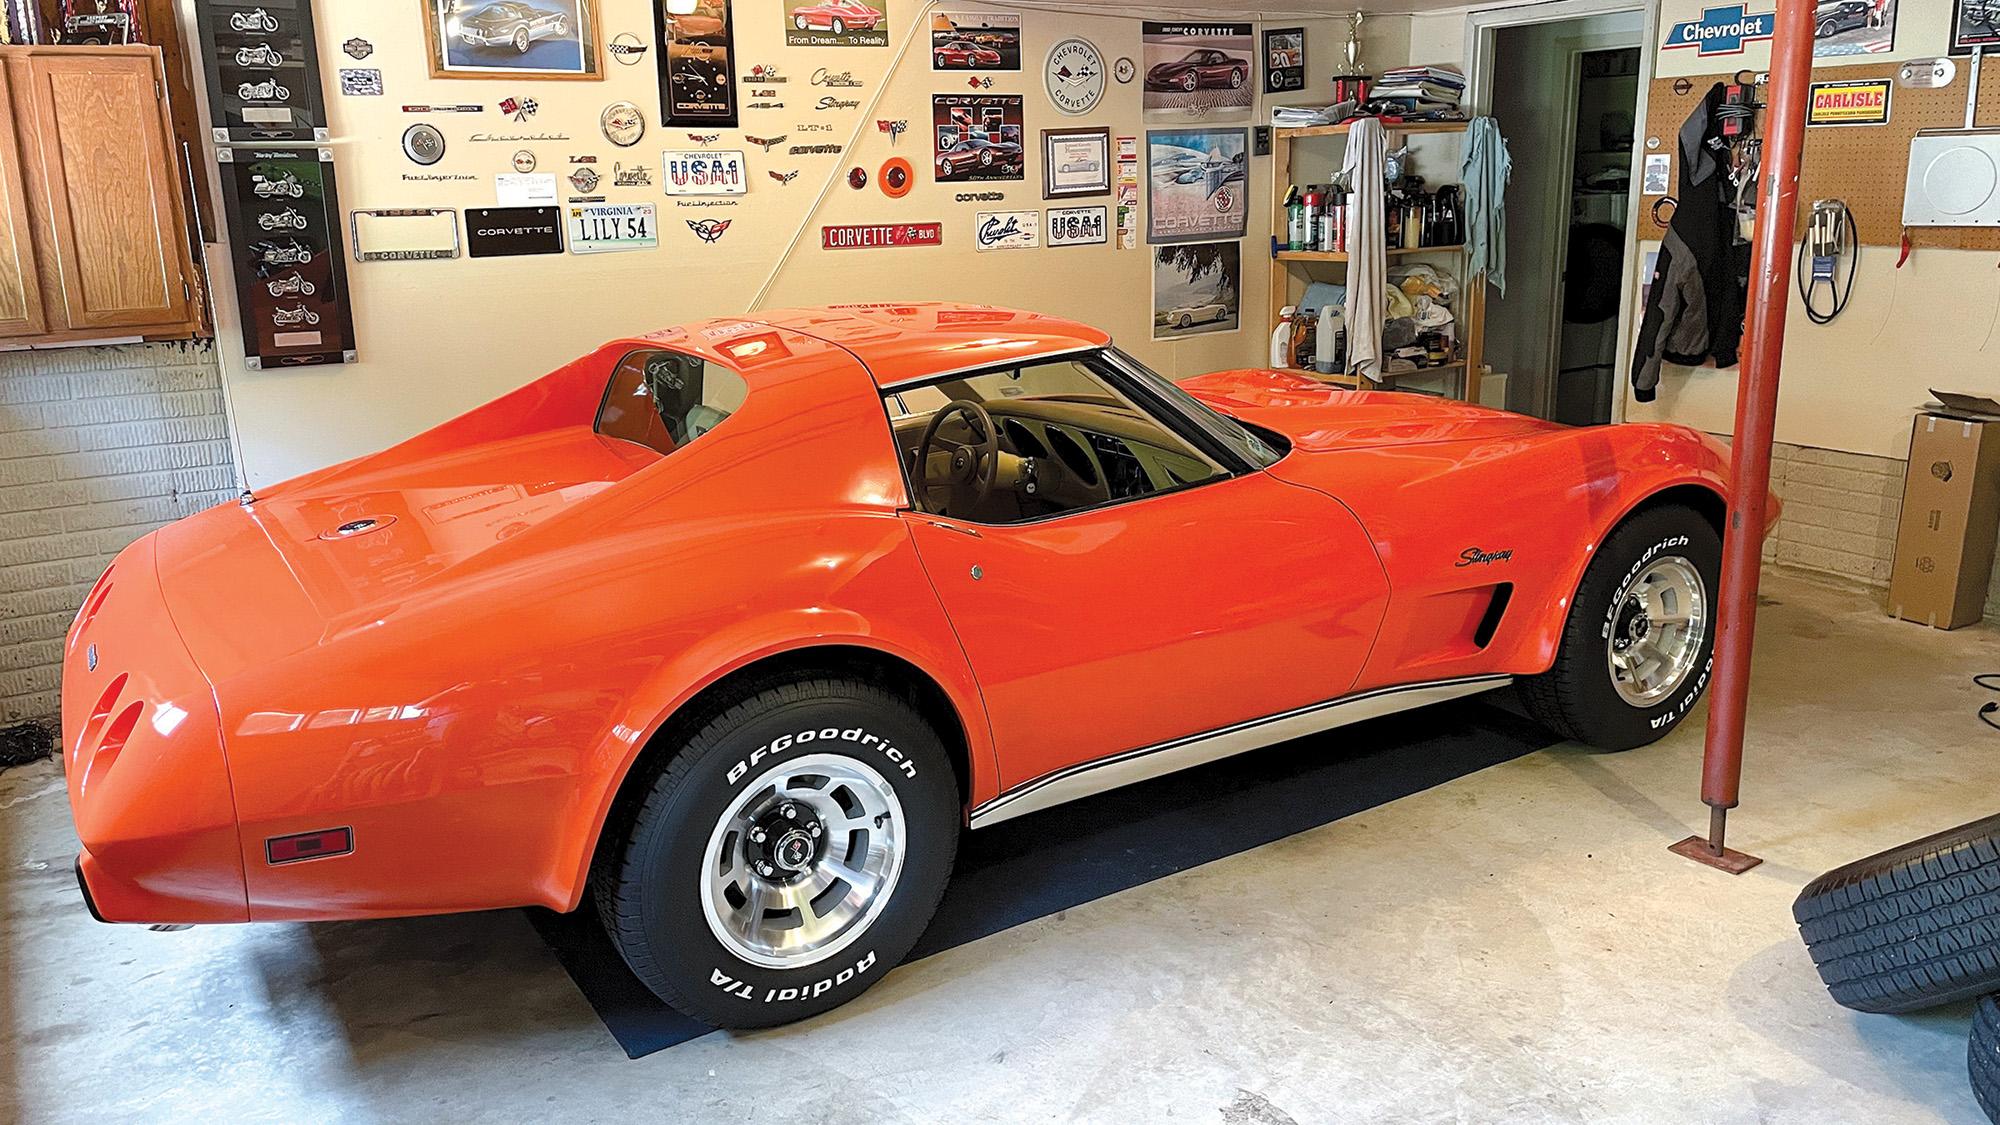 Is it still possible to restore a Corvette at home? These two are doing just that